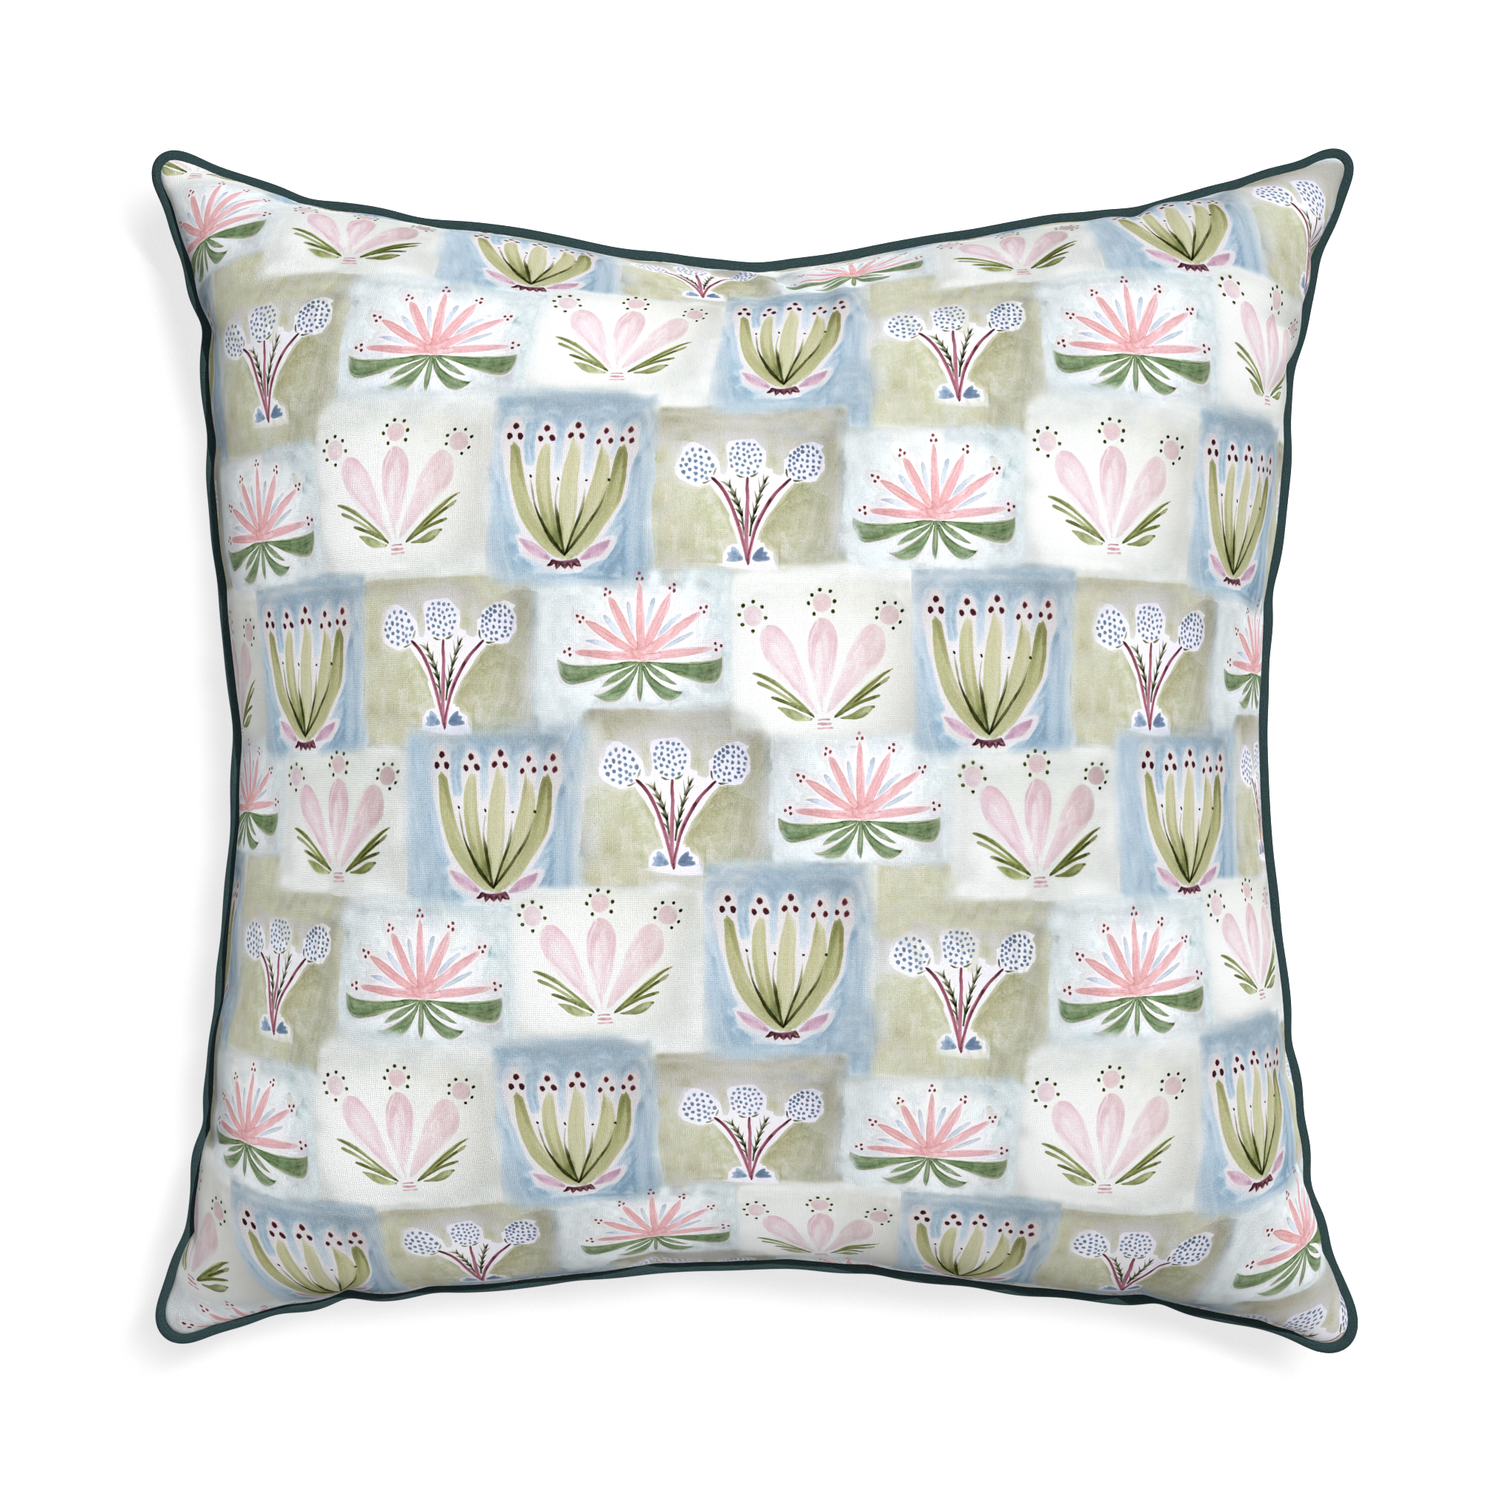 Euro-sham harper custom hand-painted floralpillow with p piping on white background